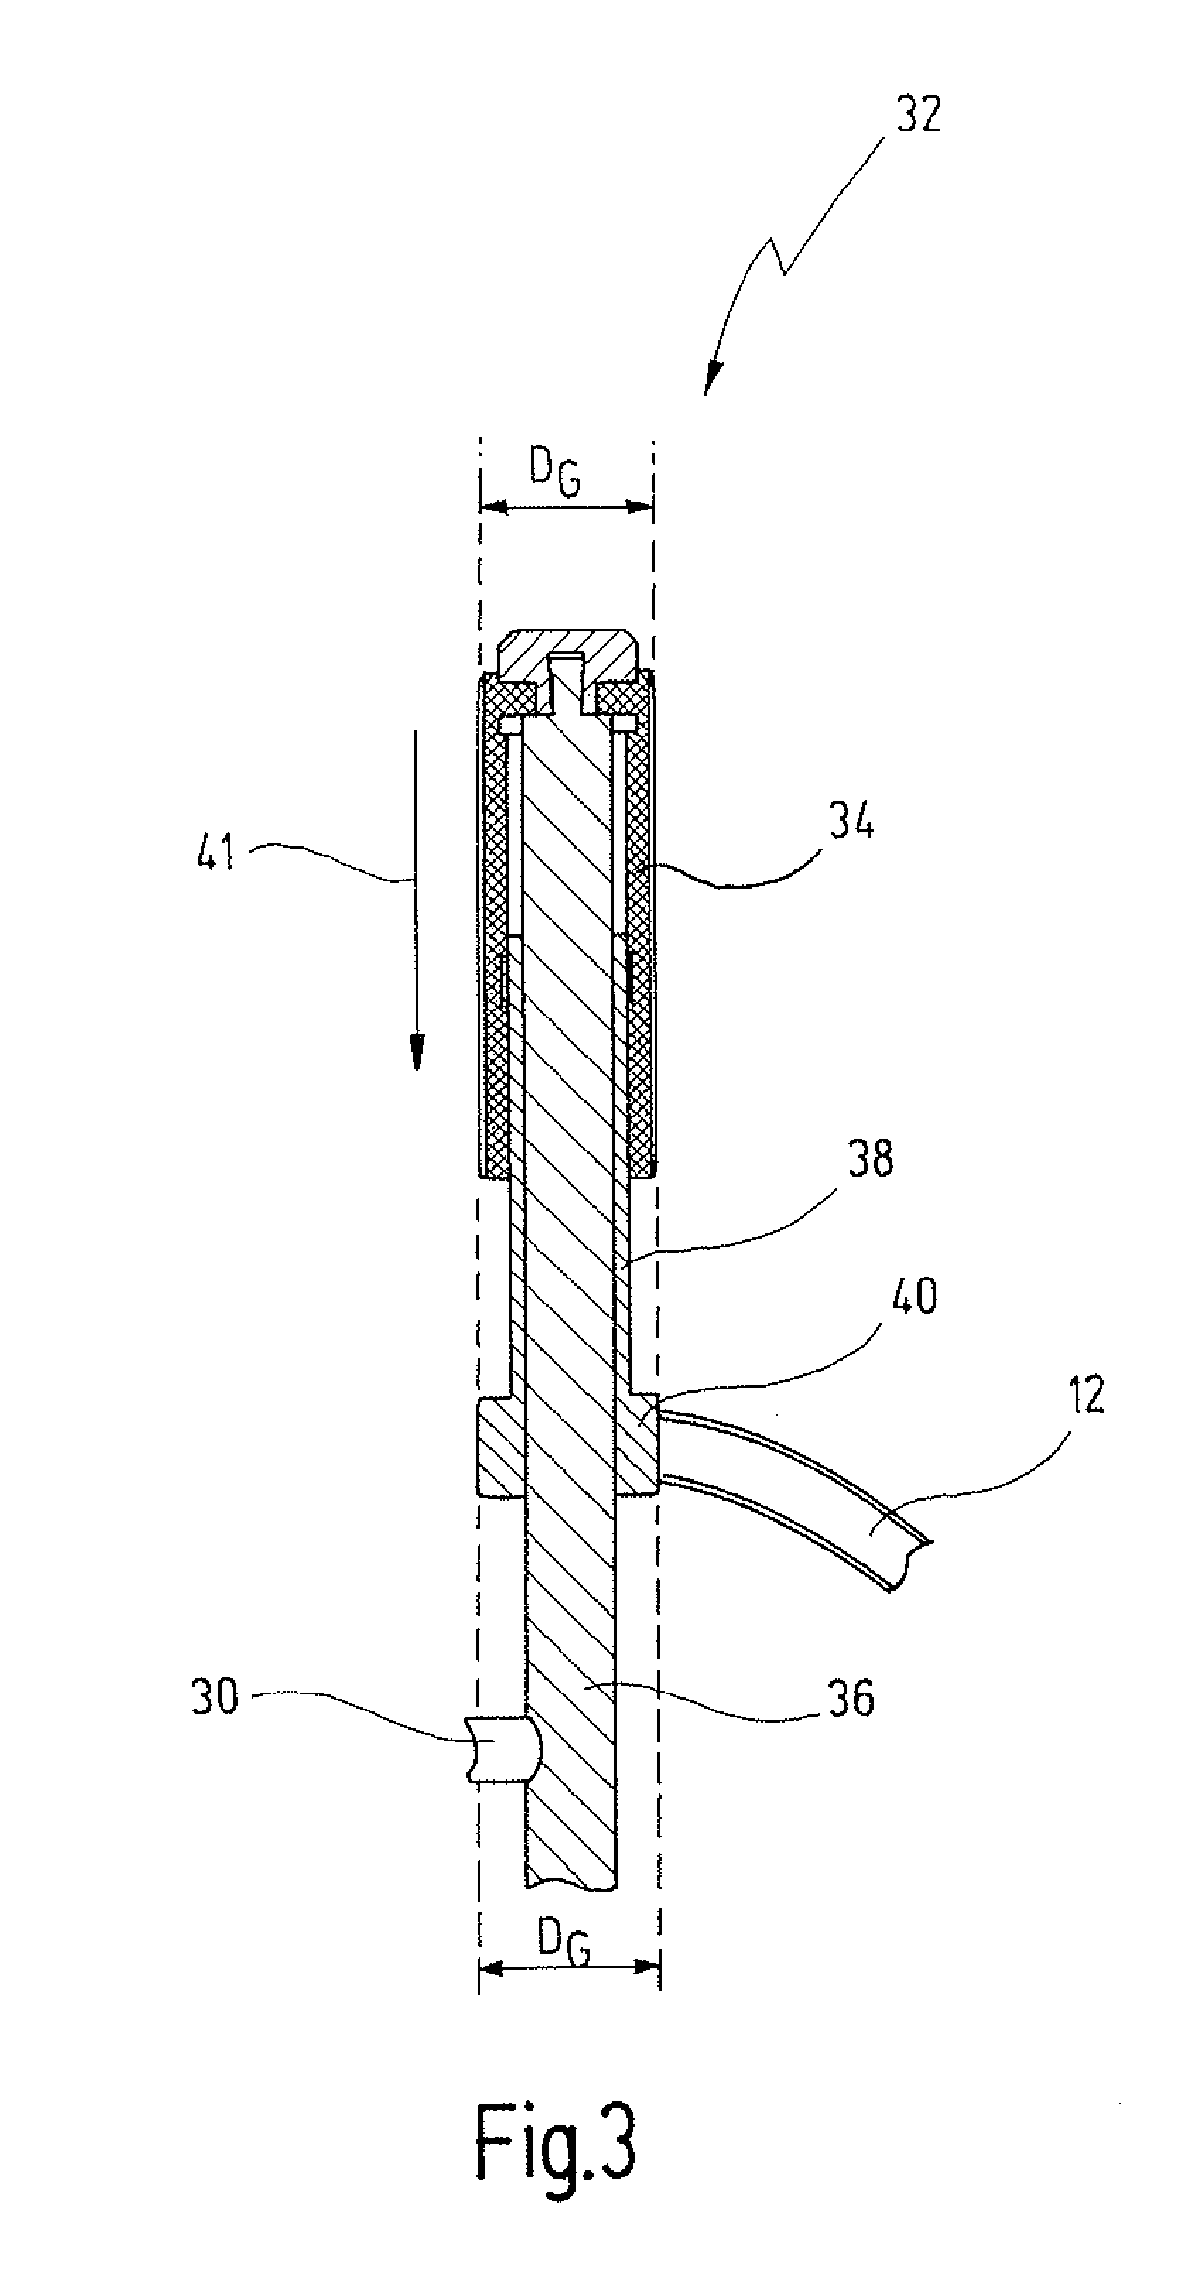 Partial Aiming Device For Targeting An Arthroscopic Operation Site For A Medical Intervention